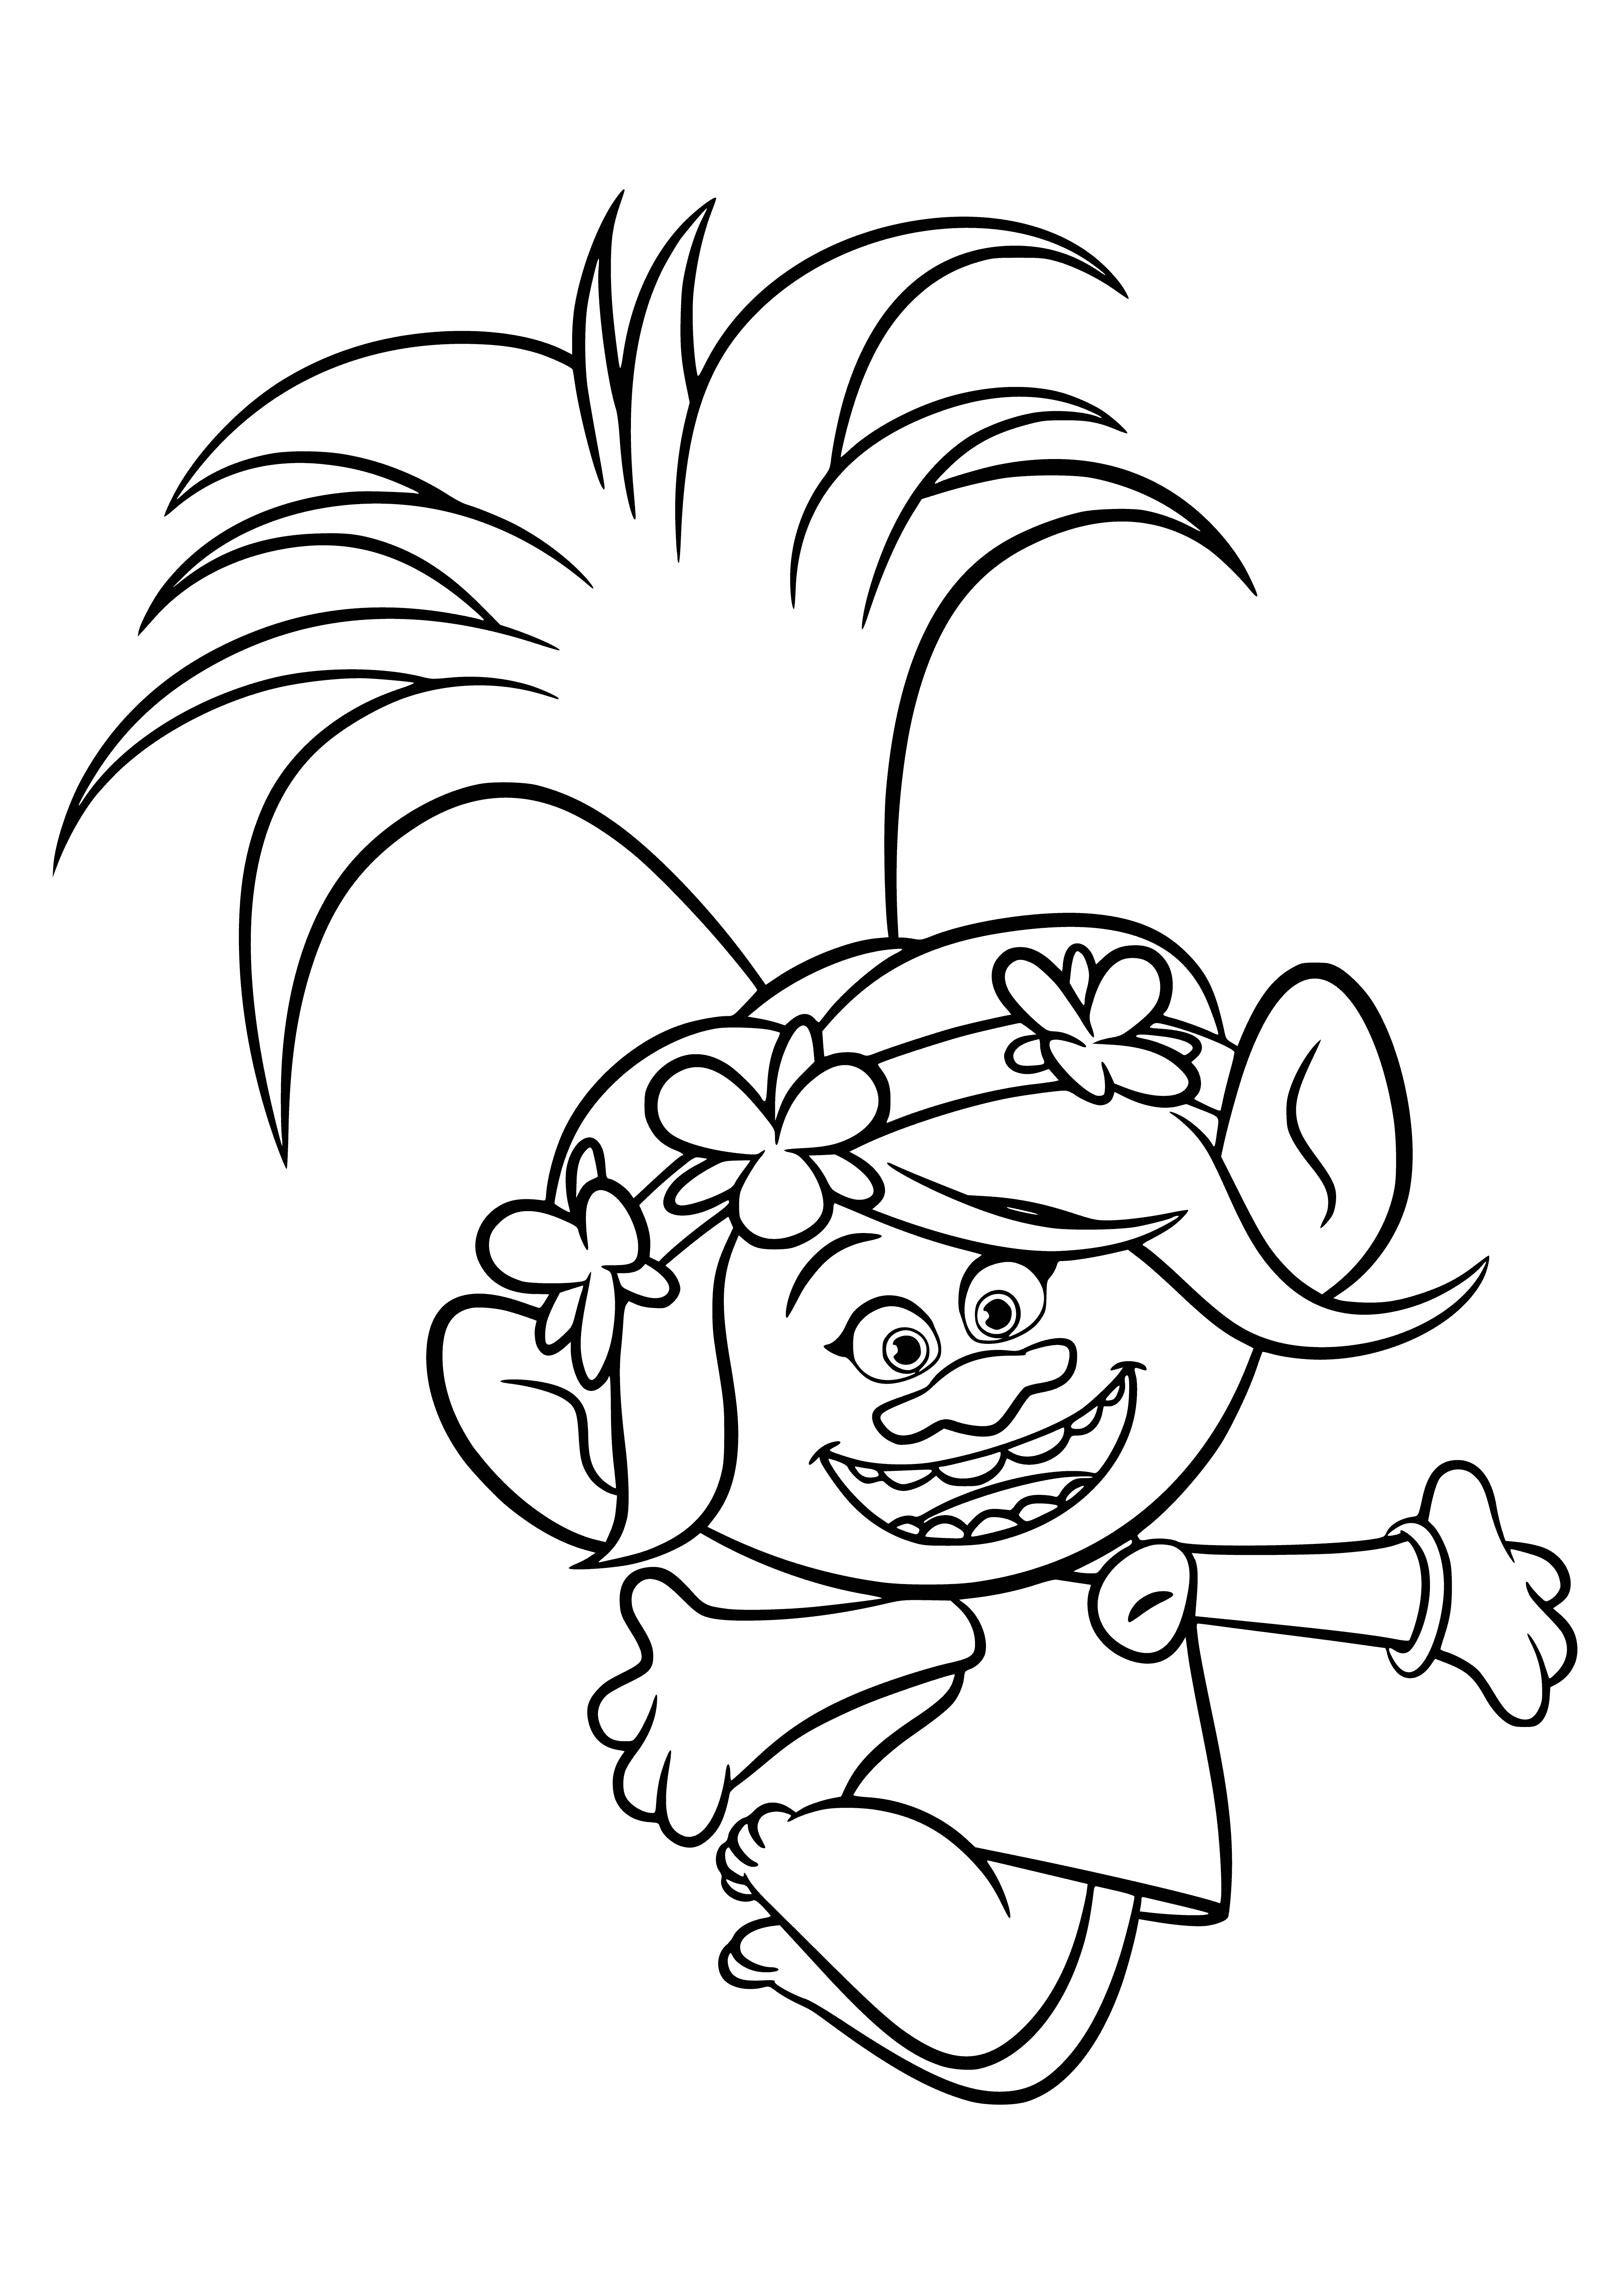 Rosette coloring page